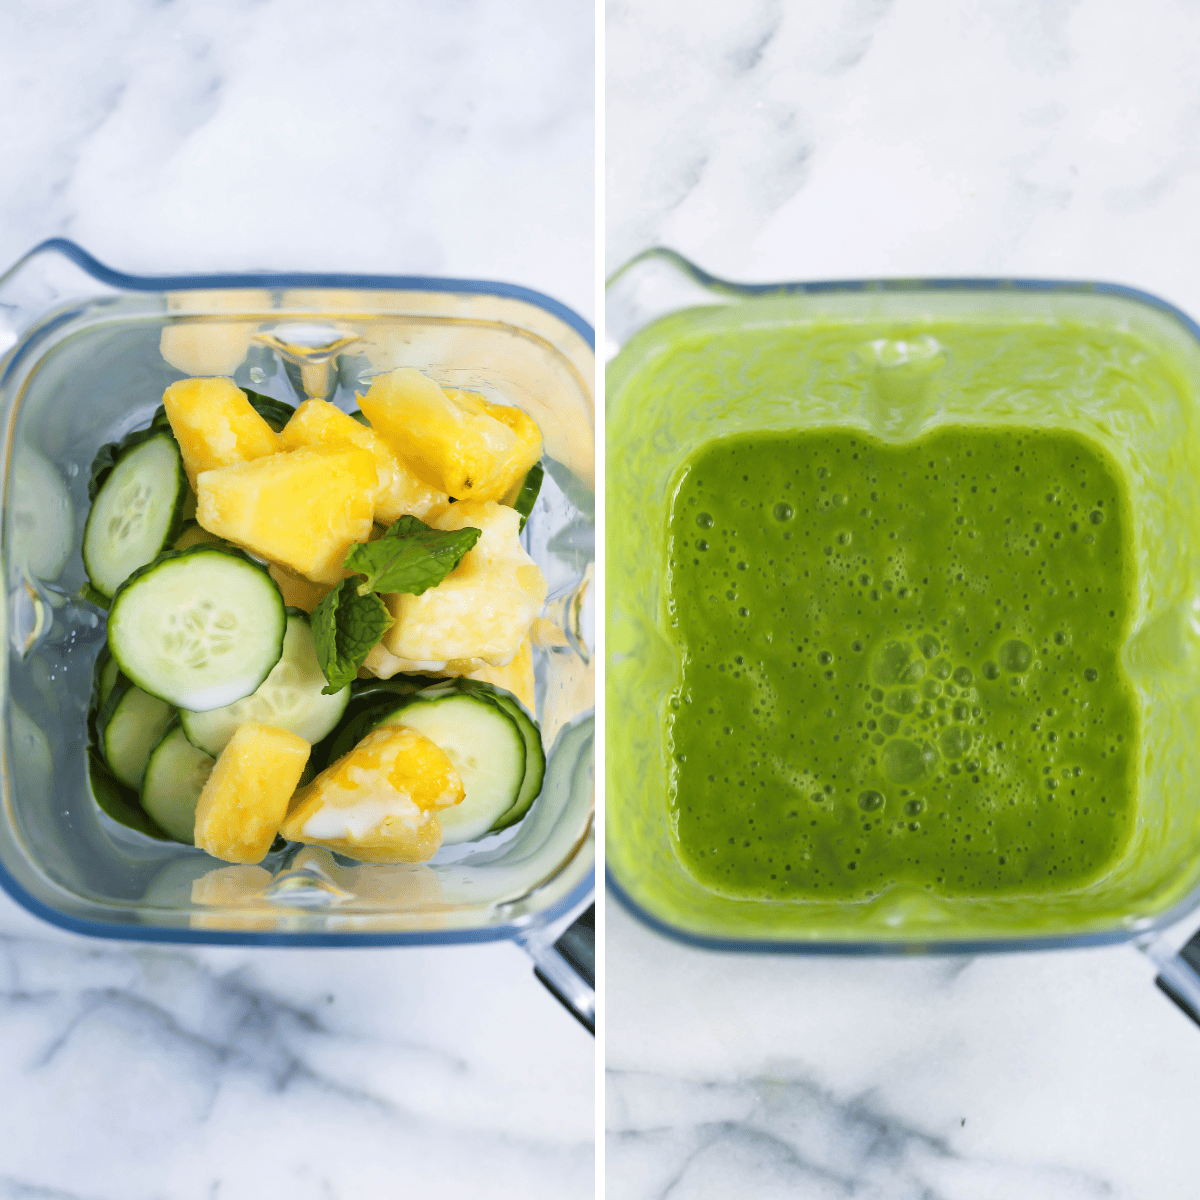 how to make a cucumber pineapple smoothie